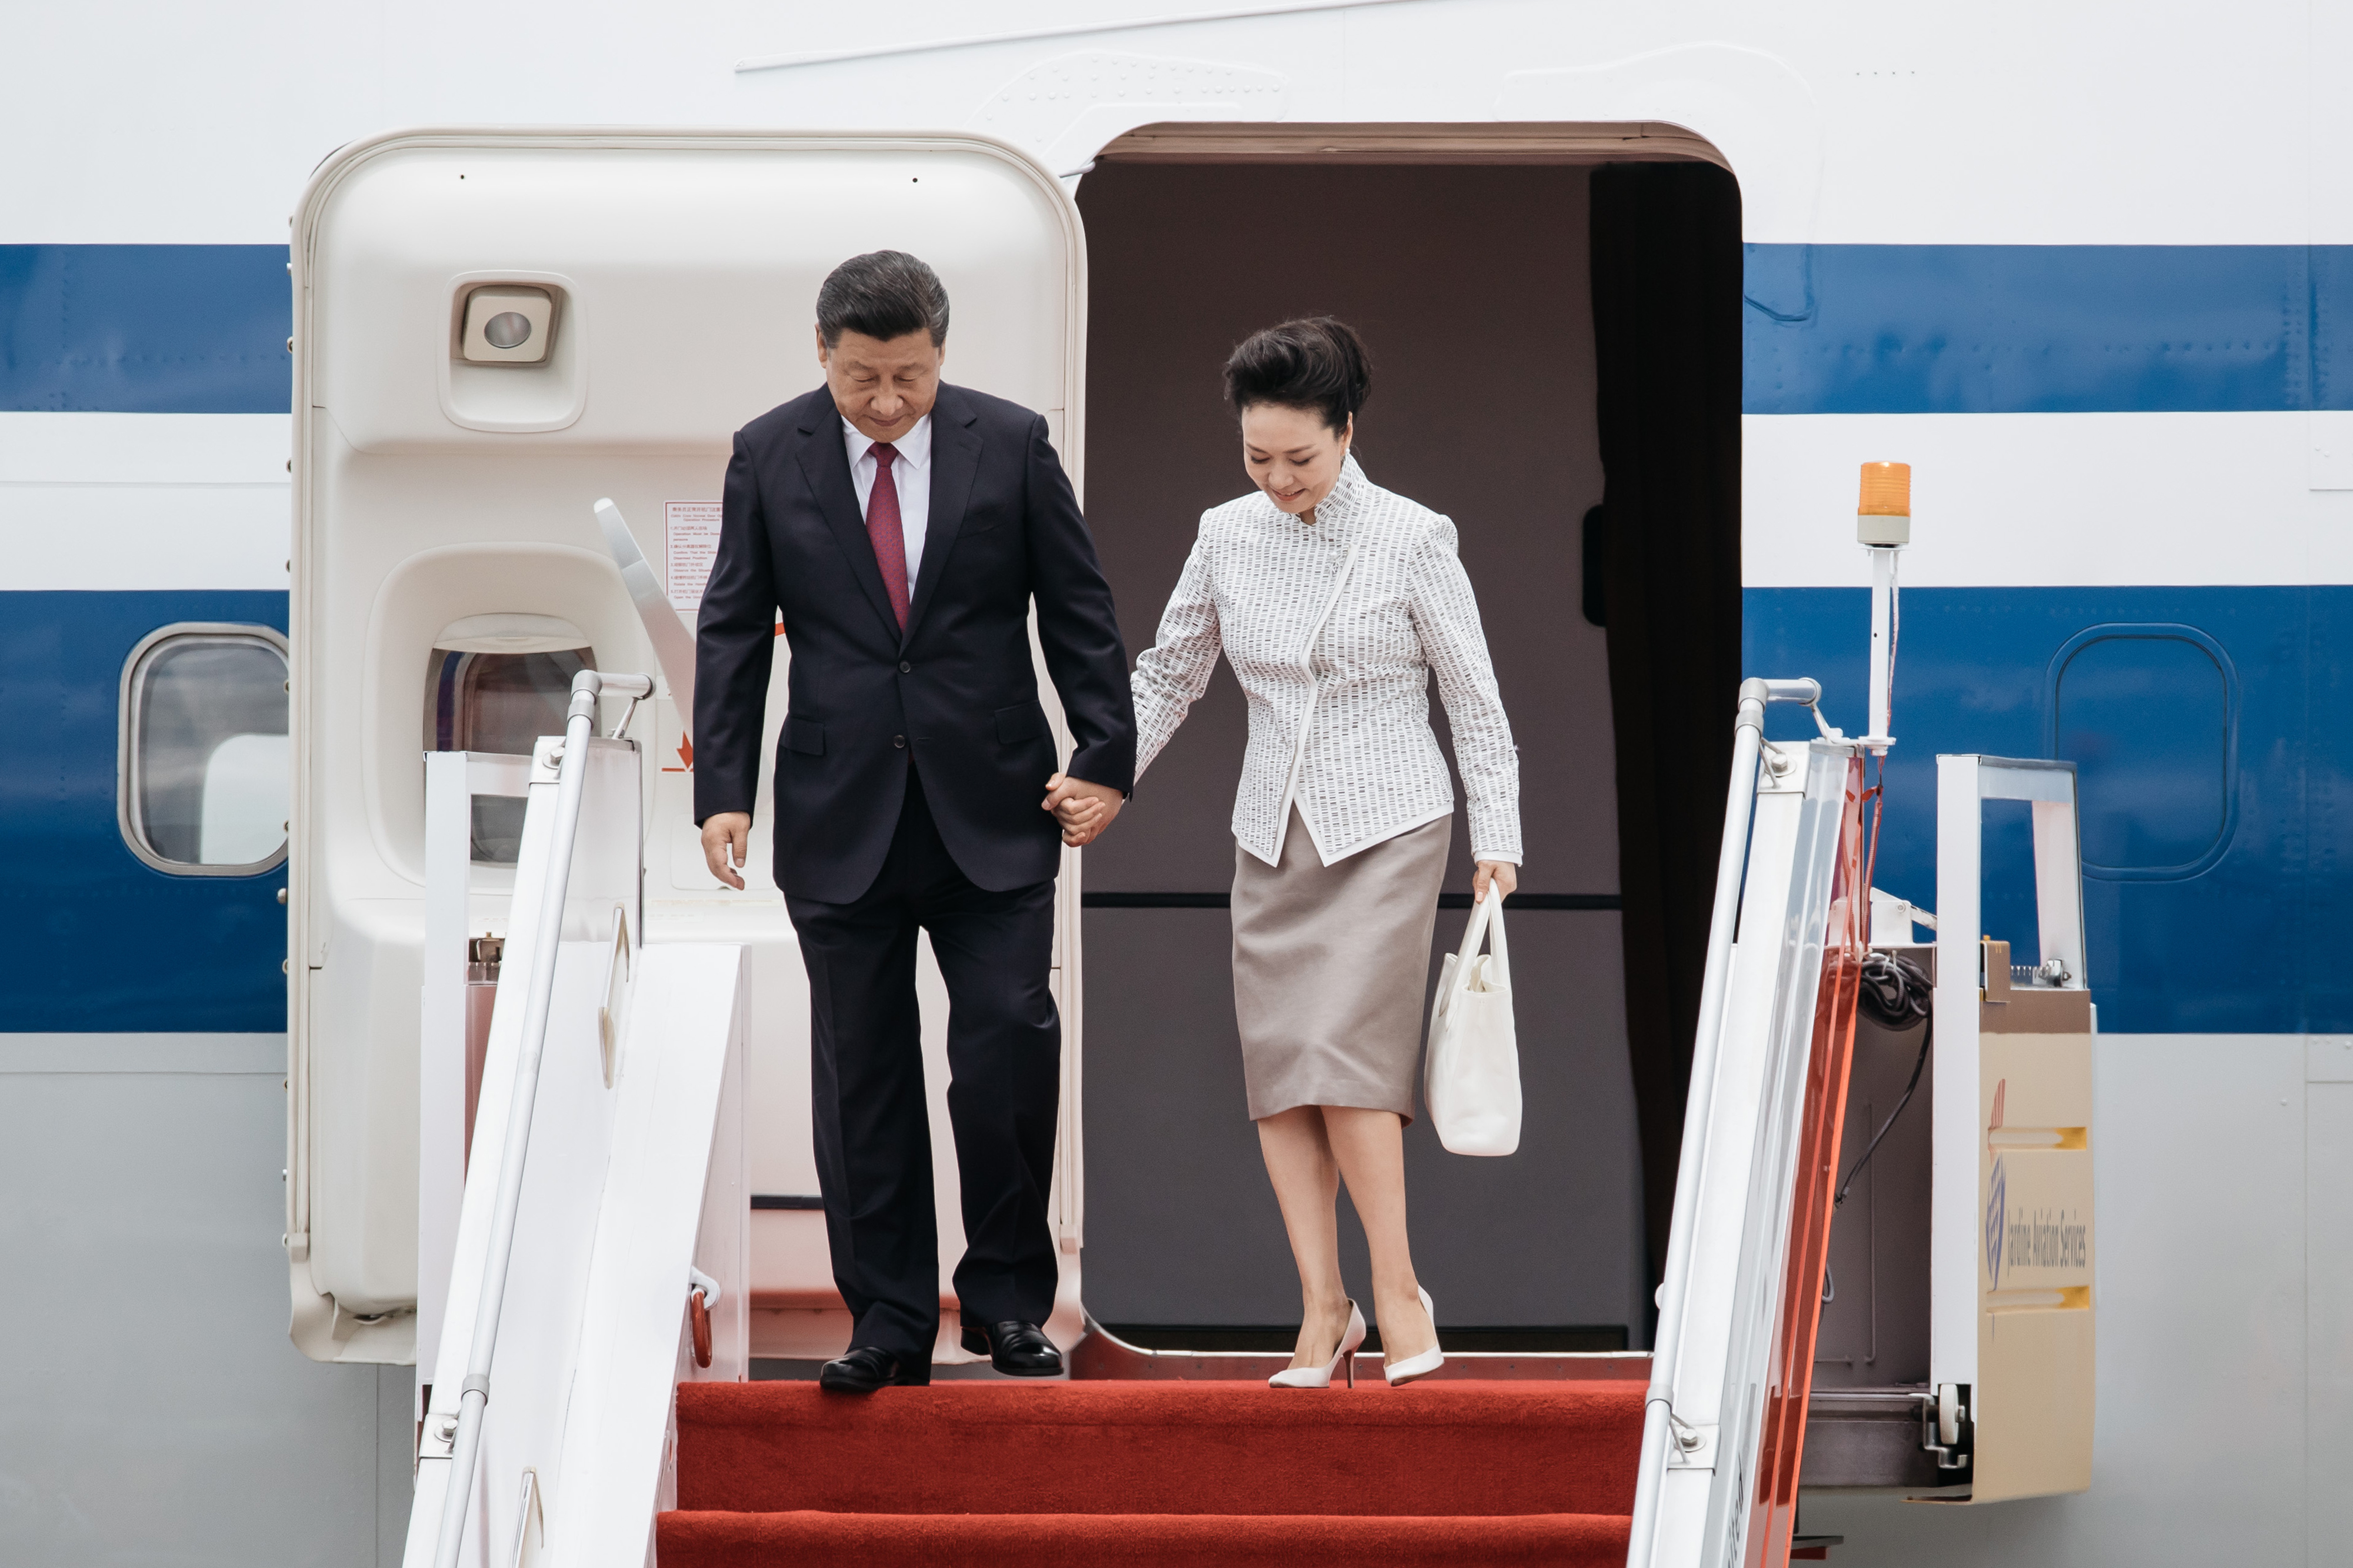 Xi Jinping, China's president, left, and Peng Liyuan, China's first lady, disembark from a plane at Hong Kong International Airport in Hong Kong, China, on Thursday, June 29, 2017. Xi arrived Thursday for his first visit to the financial hub since becoming China's top leader in 2012. (Anthony Kwan/Bloomberg via Getty Images)